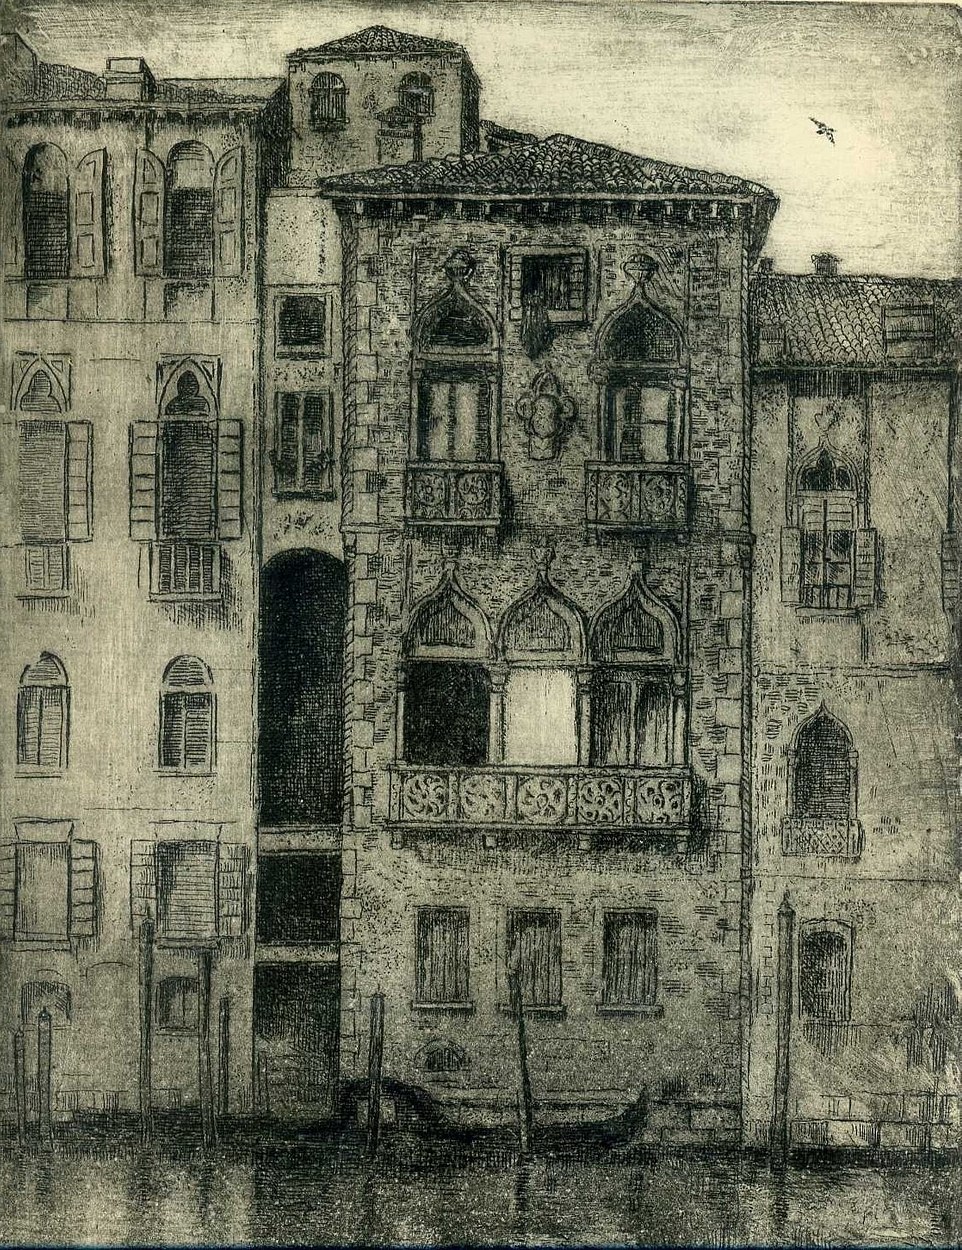 Desdemona's House, etching, image size 20 x 25 cm., edition of 30, £150